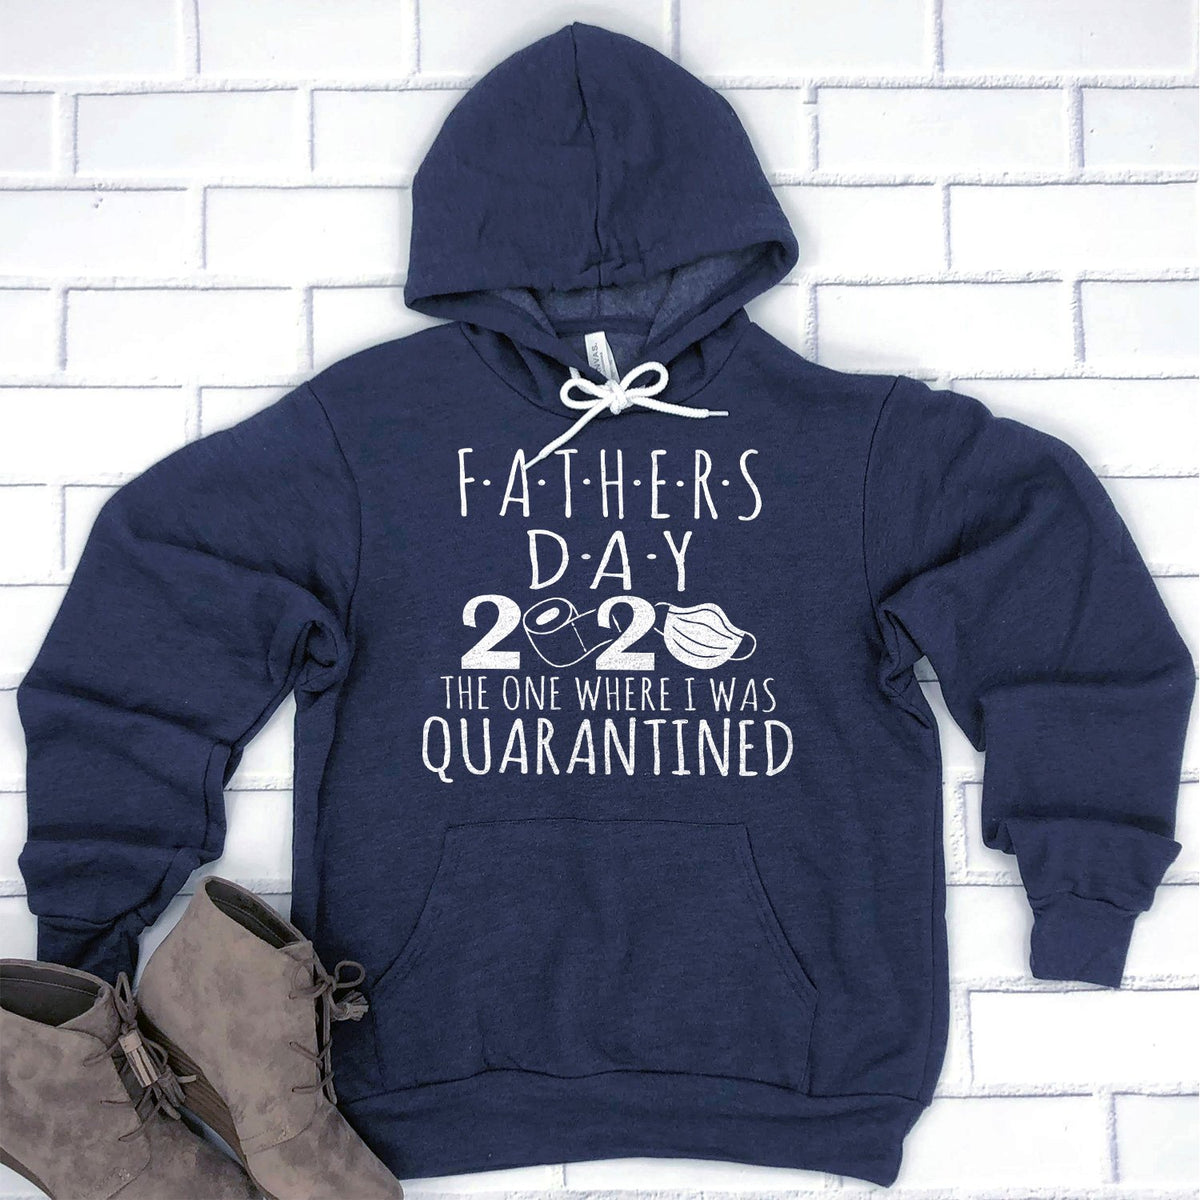 Fathers Day 2020 The One Where I Was Quarantined - Hoodie Sweatshirt